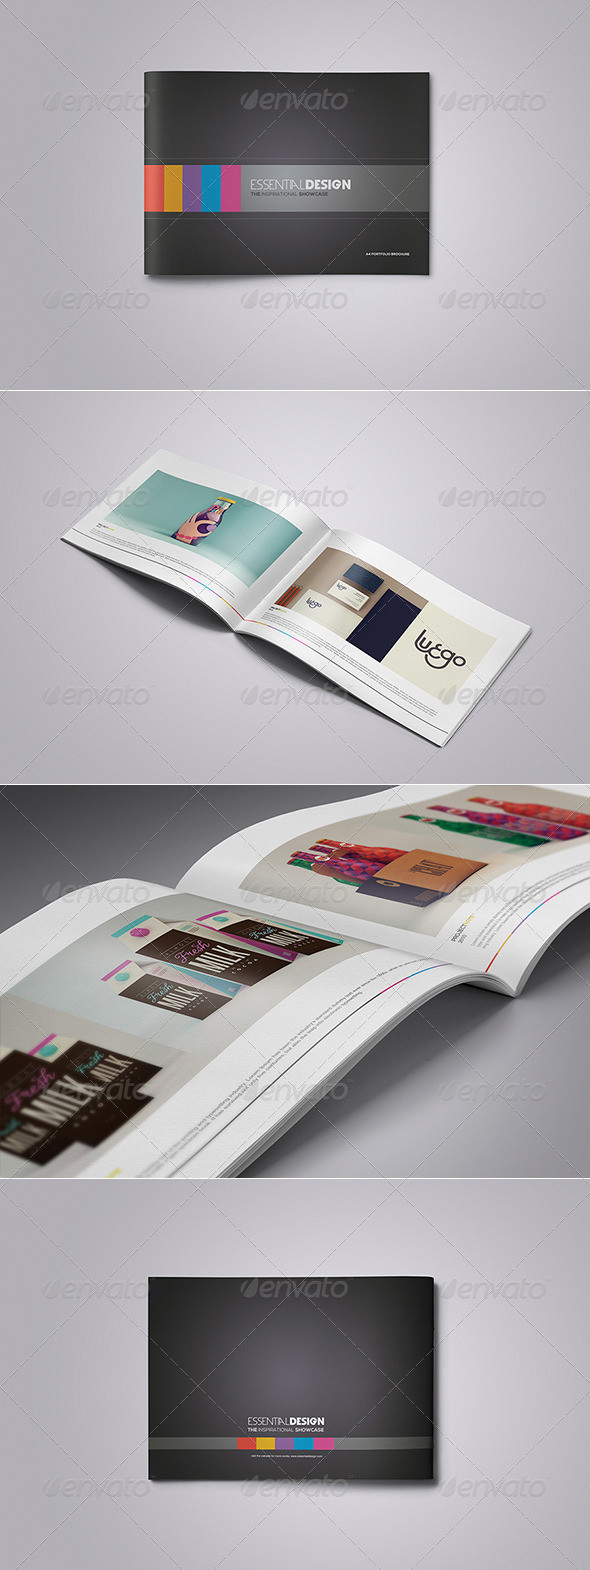 Image 20preview